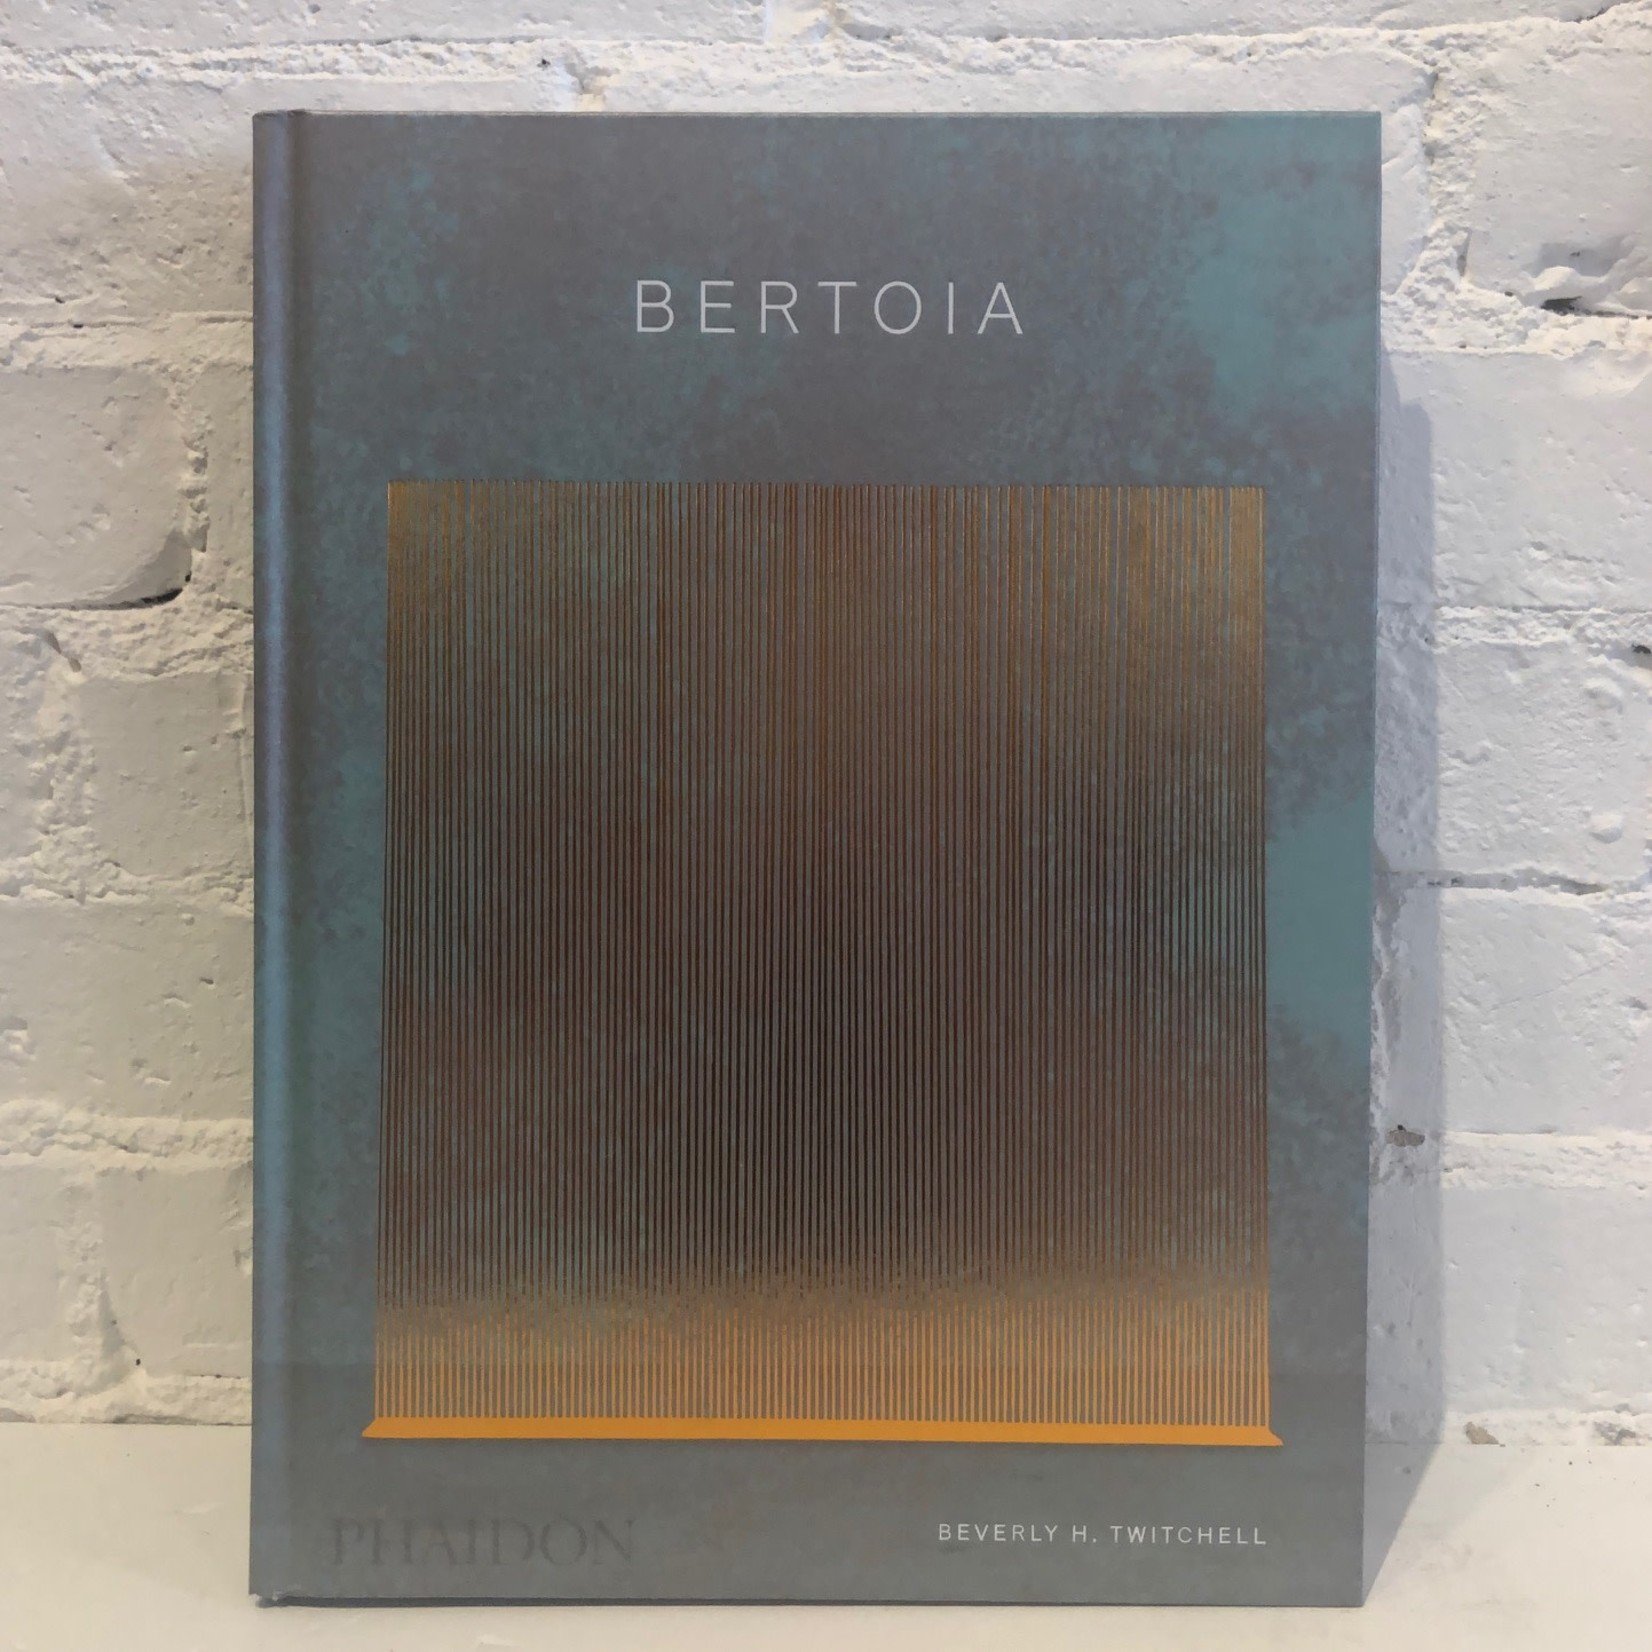 Bertoia by Beverly H. Twitchell